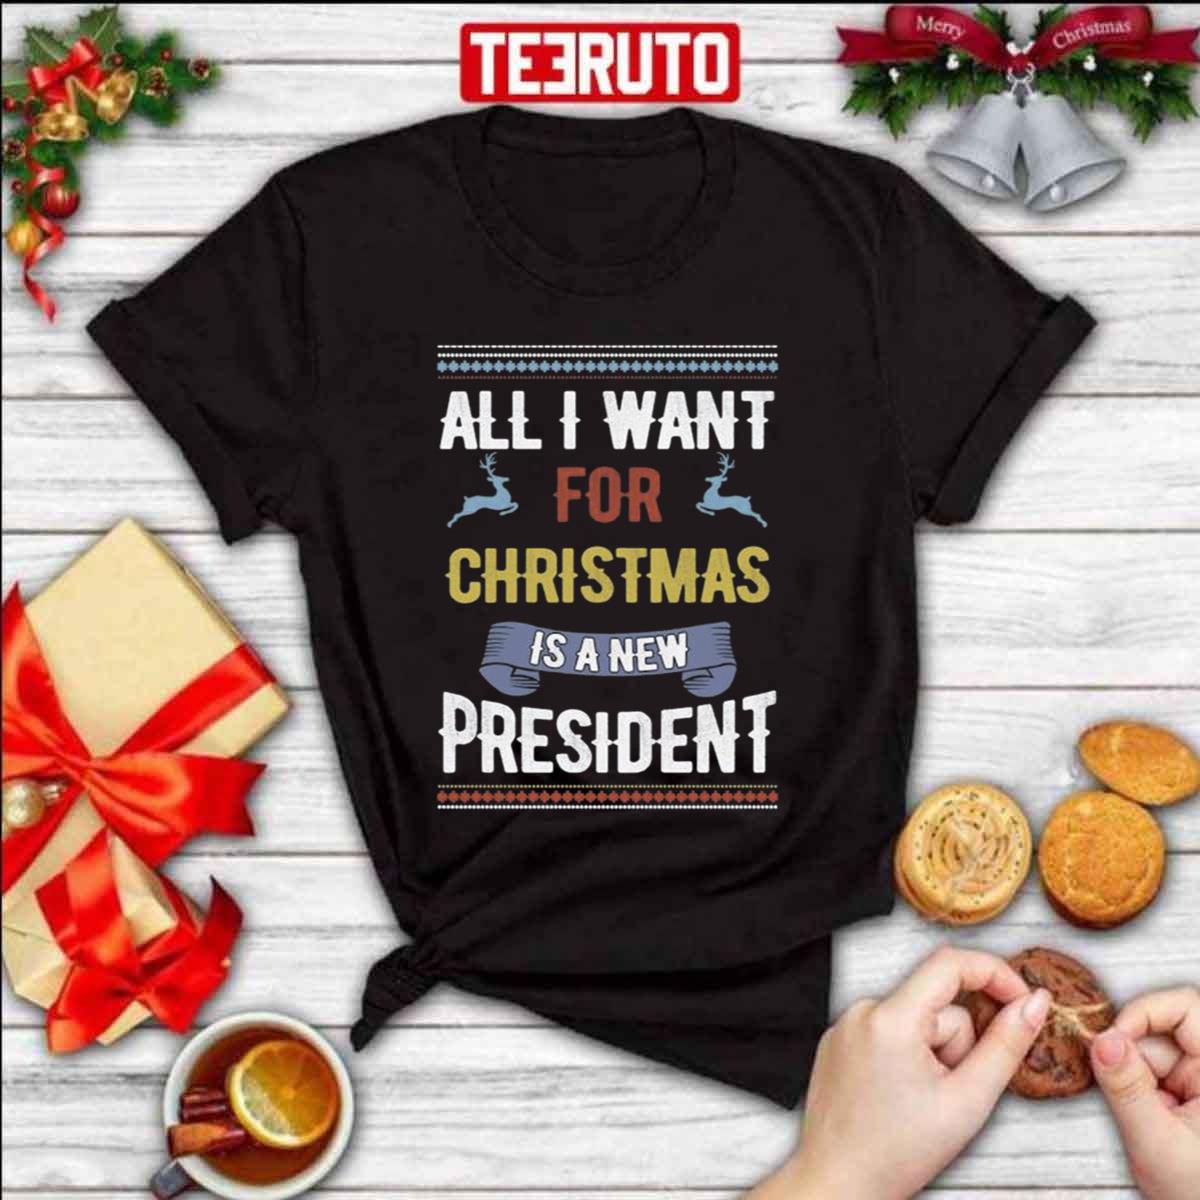 All I Want For Christmas Is A New President Ugly Christmas Unisex Sweatshirt T-Shirt